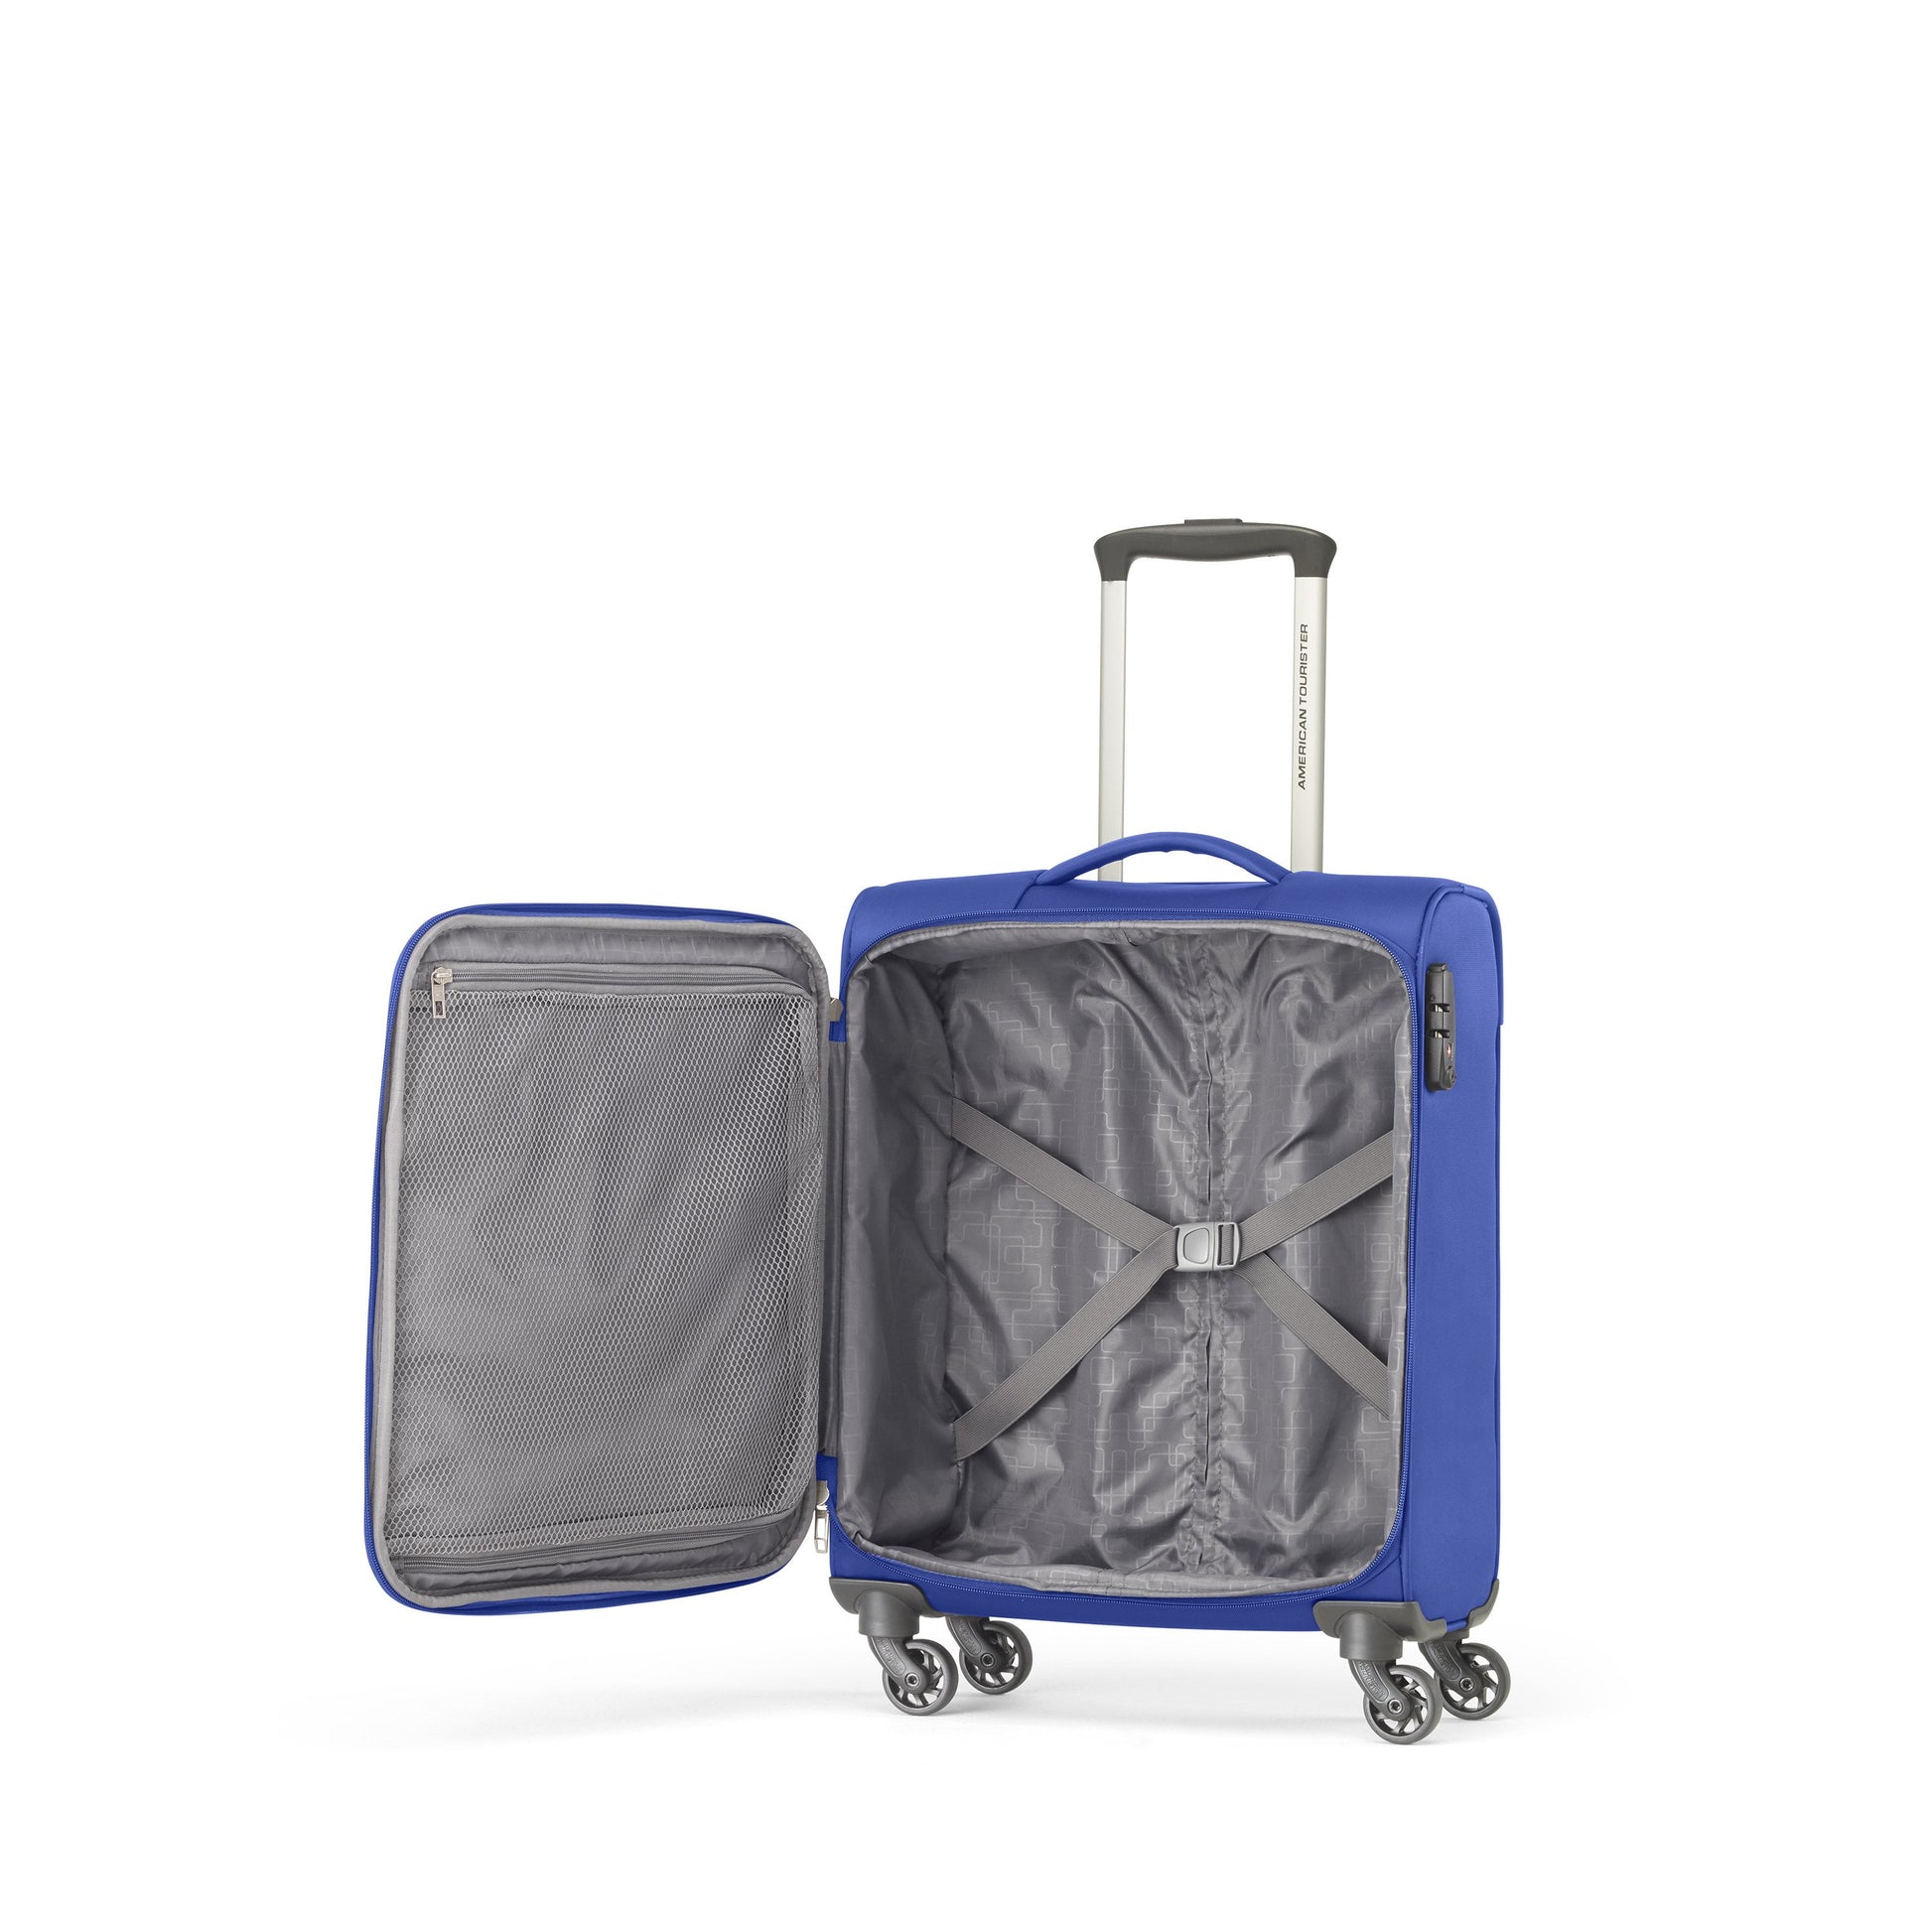 American Tourister Bayview NXT Spinner Carry-On Luggage